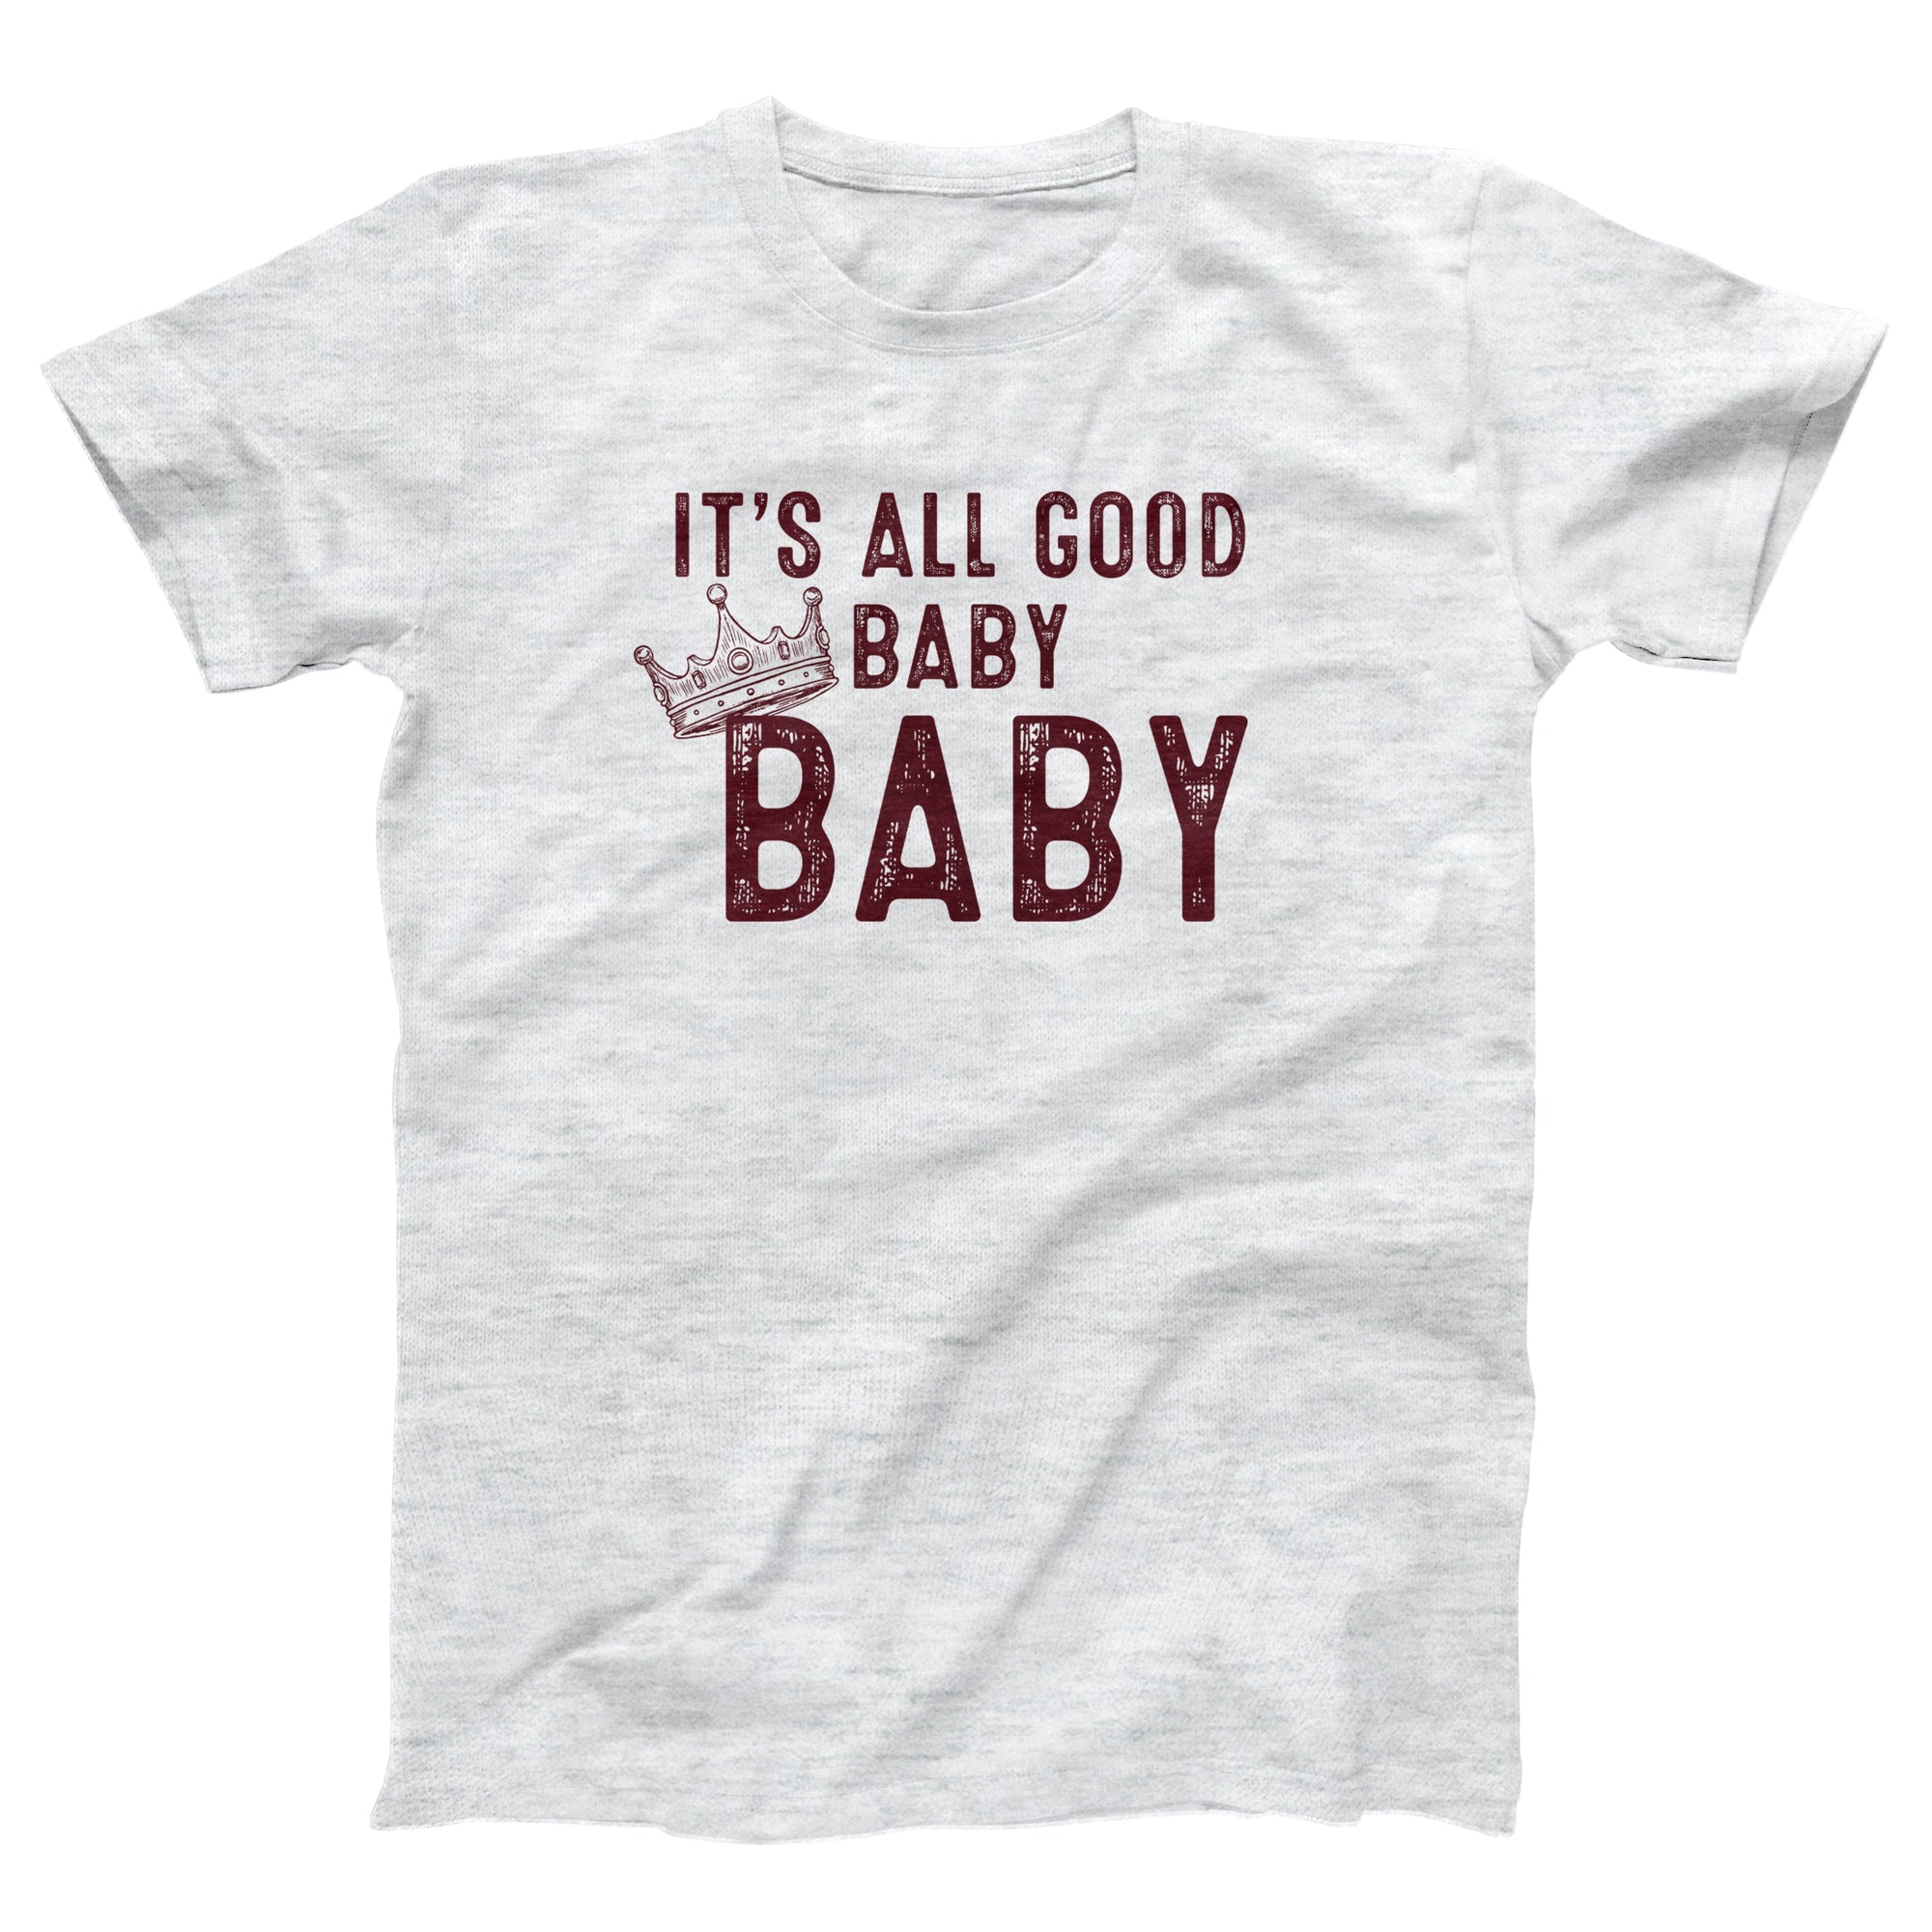 It's All Good Baby Baby Adult Unisex T-Shirt - Twisted Gorilla